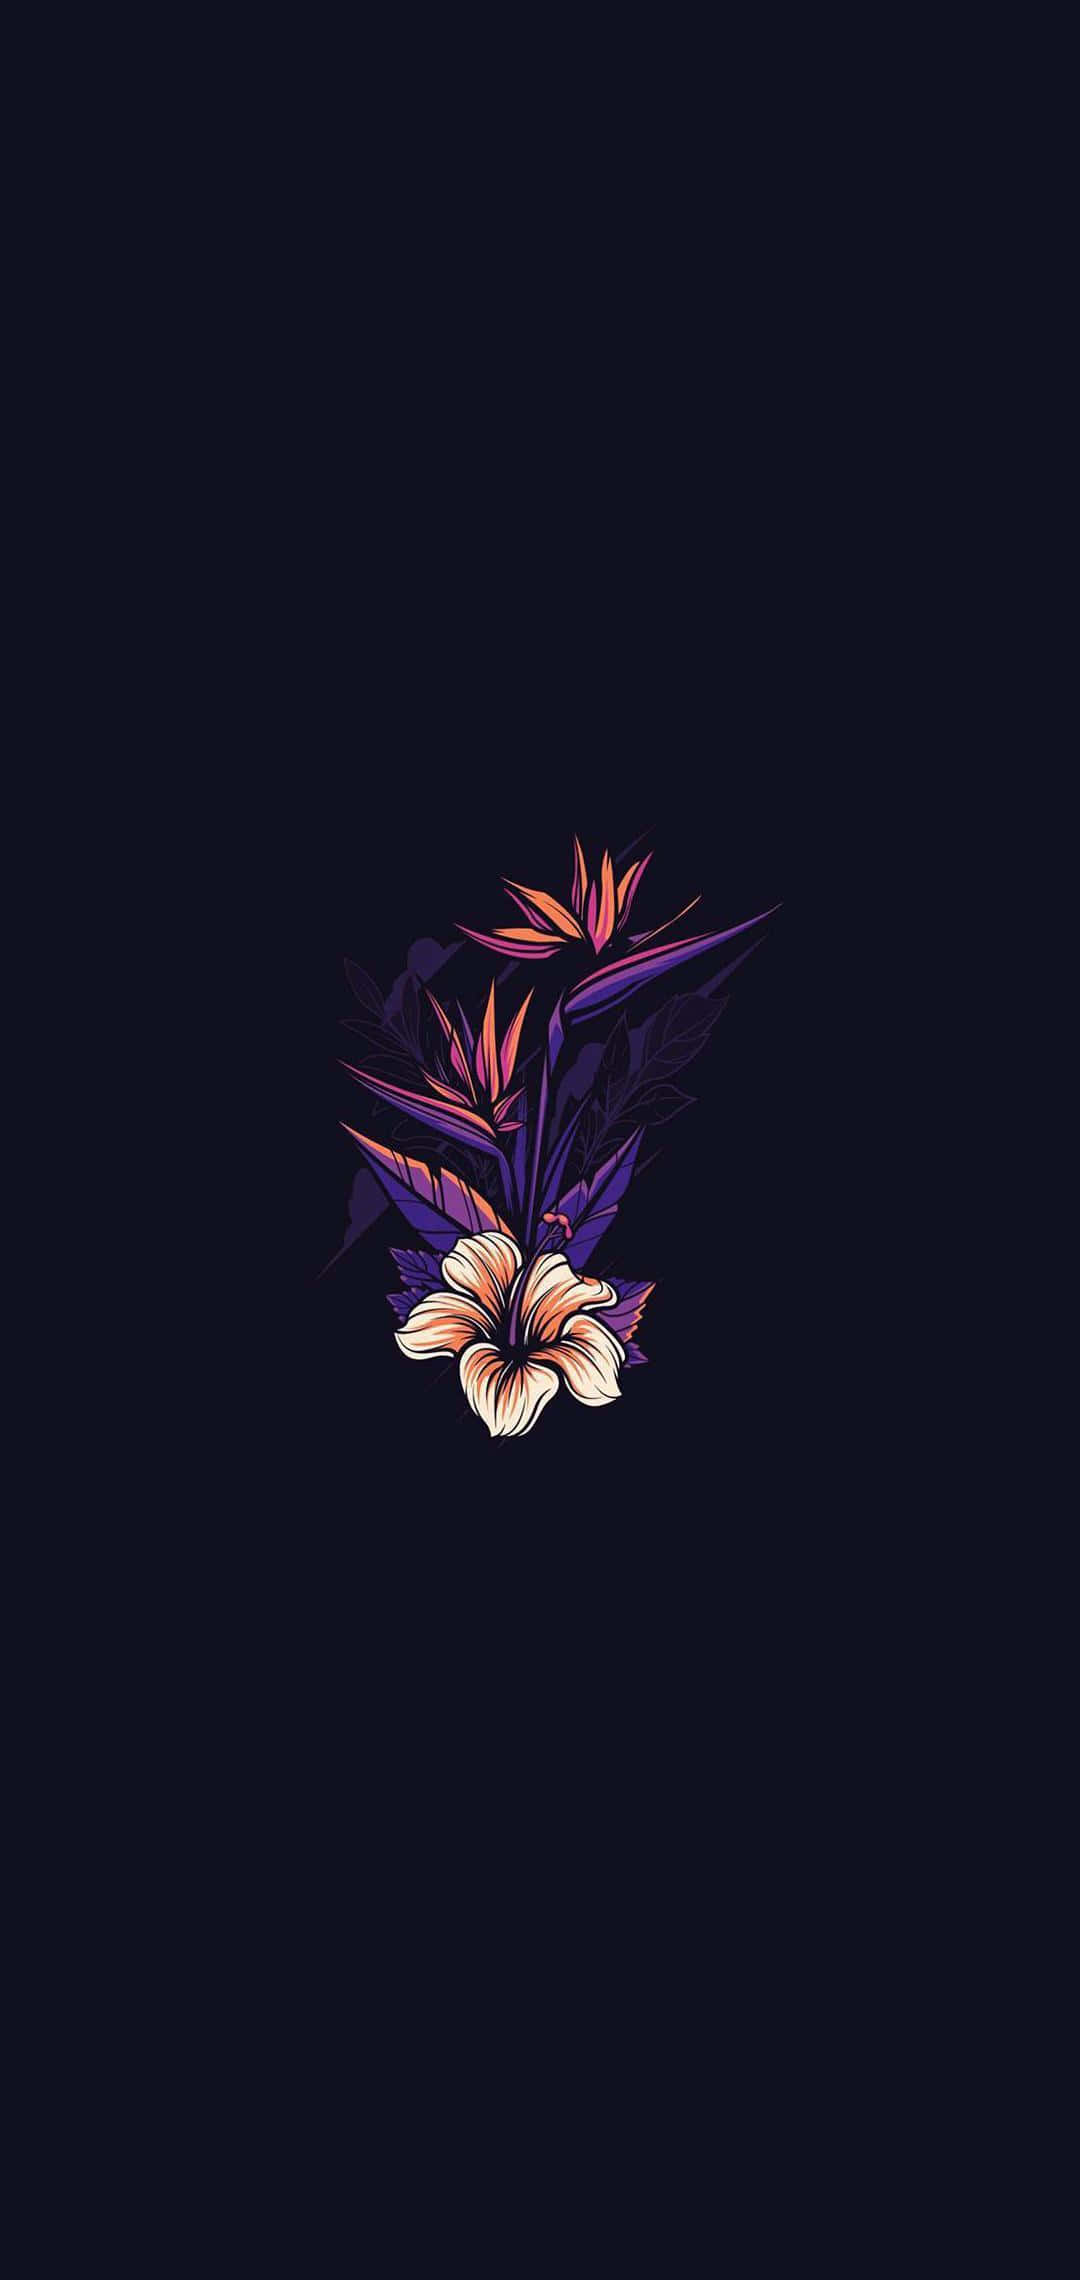 A Black Background With A Purple Flower On It